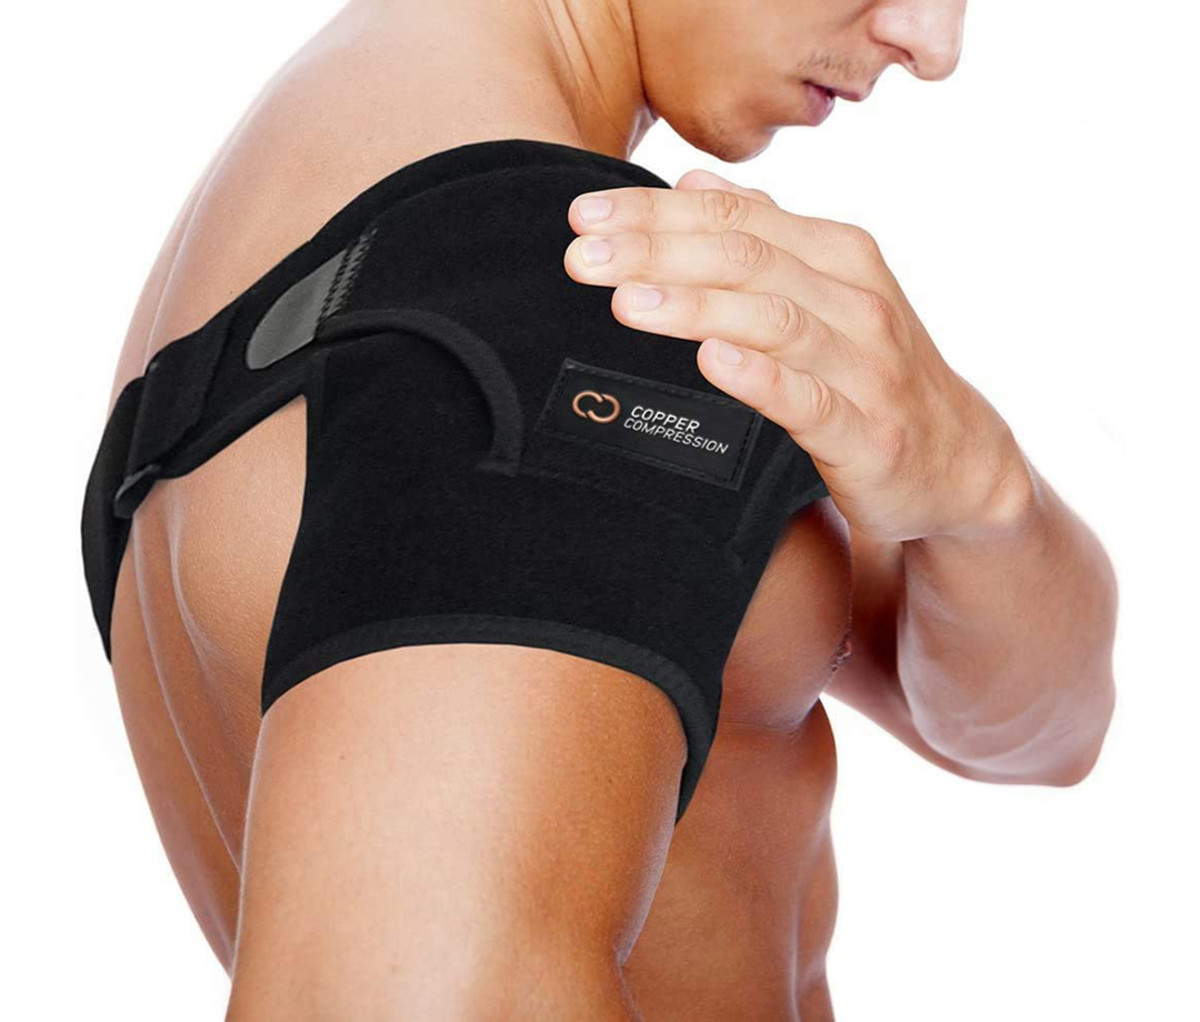 This Shoulder Brace Will Help You Bounce Back From Pain - Men's Journal